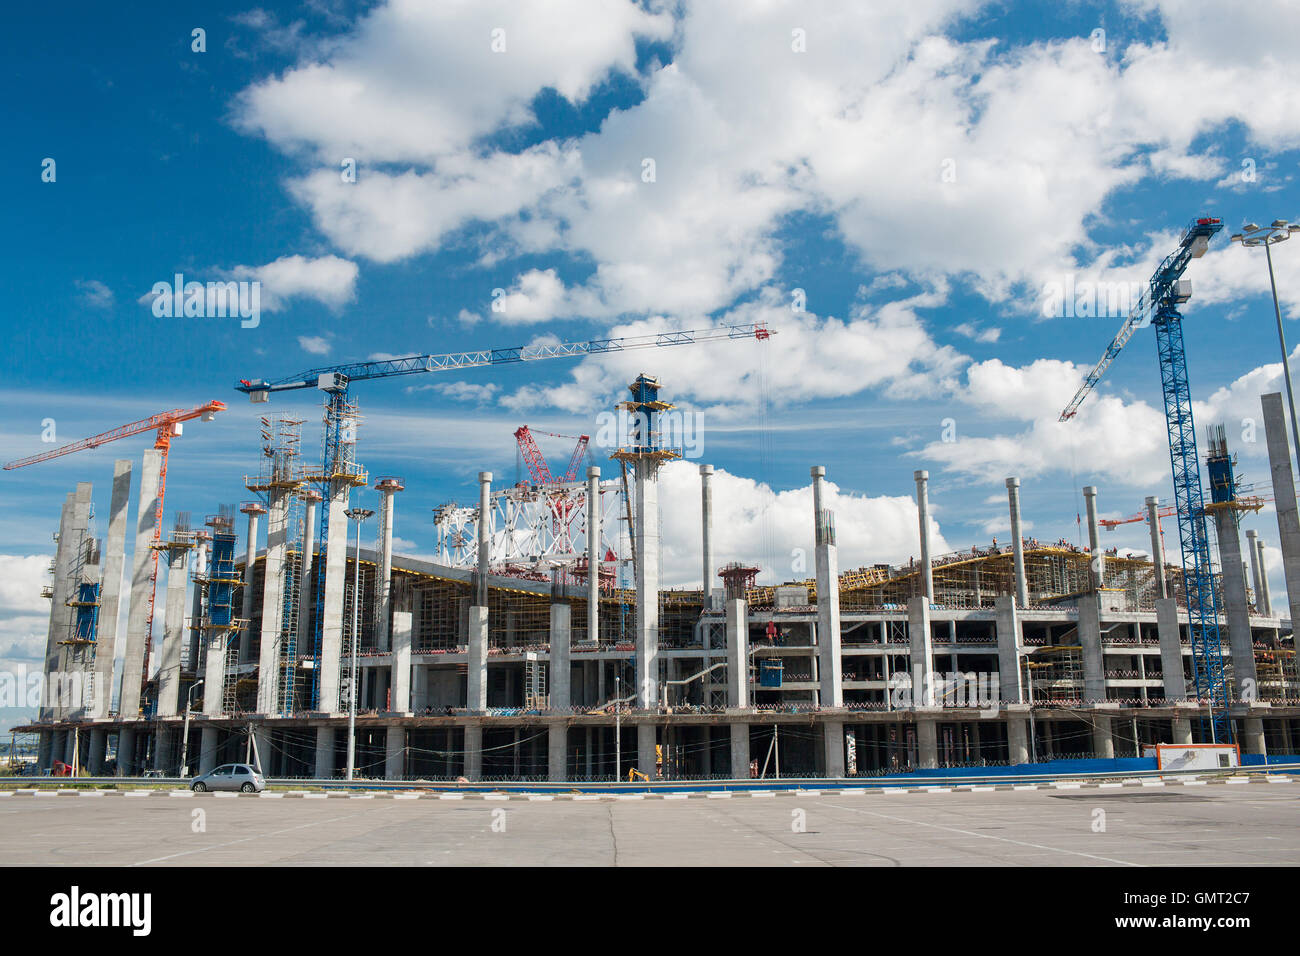 Cranes working on stadium build or reconstruction to World Cup 2018. Stock Photo